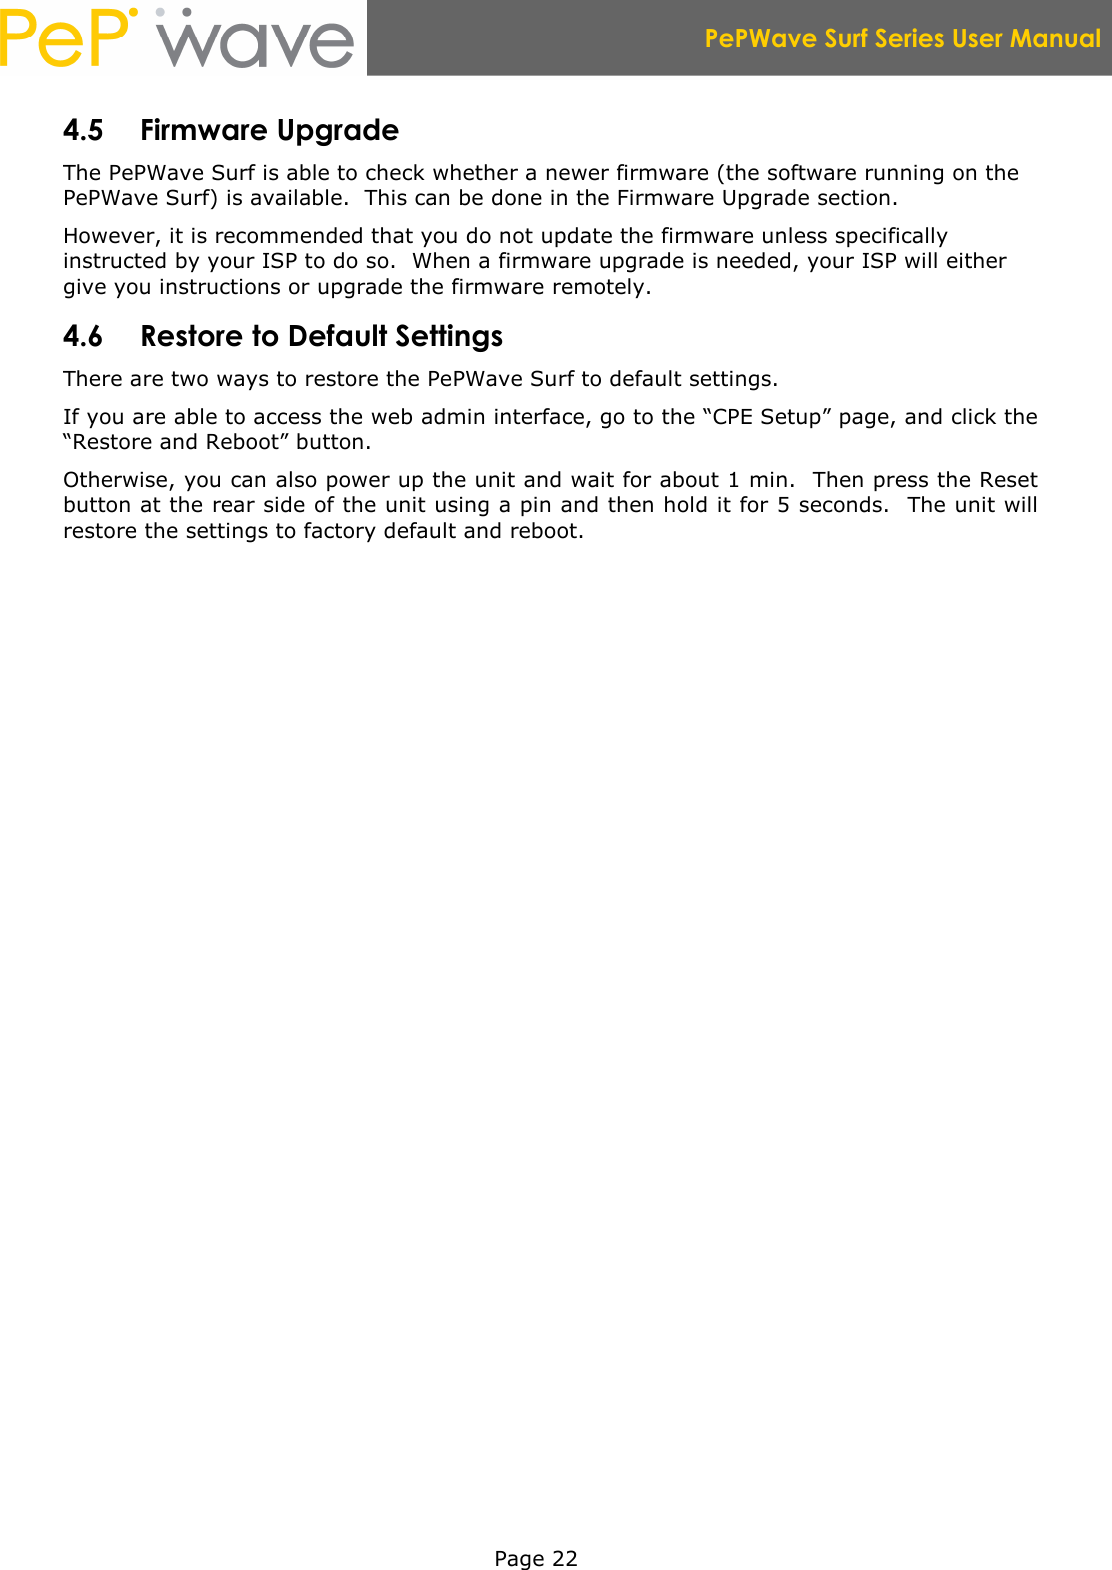  PePWave Surf Series User Manual   Page 22 4.5 Firmware Upgrade The PePWave Surf is able to check whether a newer firmware (the software running on the PePWave Surf) is available.  This can be done in the Firmware Upgrade section. However, it is recommended that you do not update the firmware unless specifically instructed by your ISP to do so.  When a firmware upgrade is needed, your ISP will either give you instructions or upgrade the firmware remotely. 4.6 Restore to Default Settings There are two ways to restore the PePWave Surf to default settings. If you are able to access the web admin interface, go to the “CPE Setup” page, and click the “Restore and Reboot” button. Otherwise, you can also power up the unit and wait for about 1 min.  Then press the Reset button at the rear side of the unit using a pin and then hold it for 5 seconds.  The unit will restore the settings to factory default and reboot. 